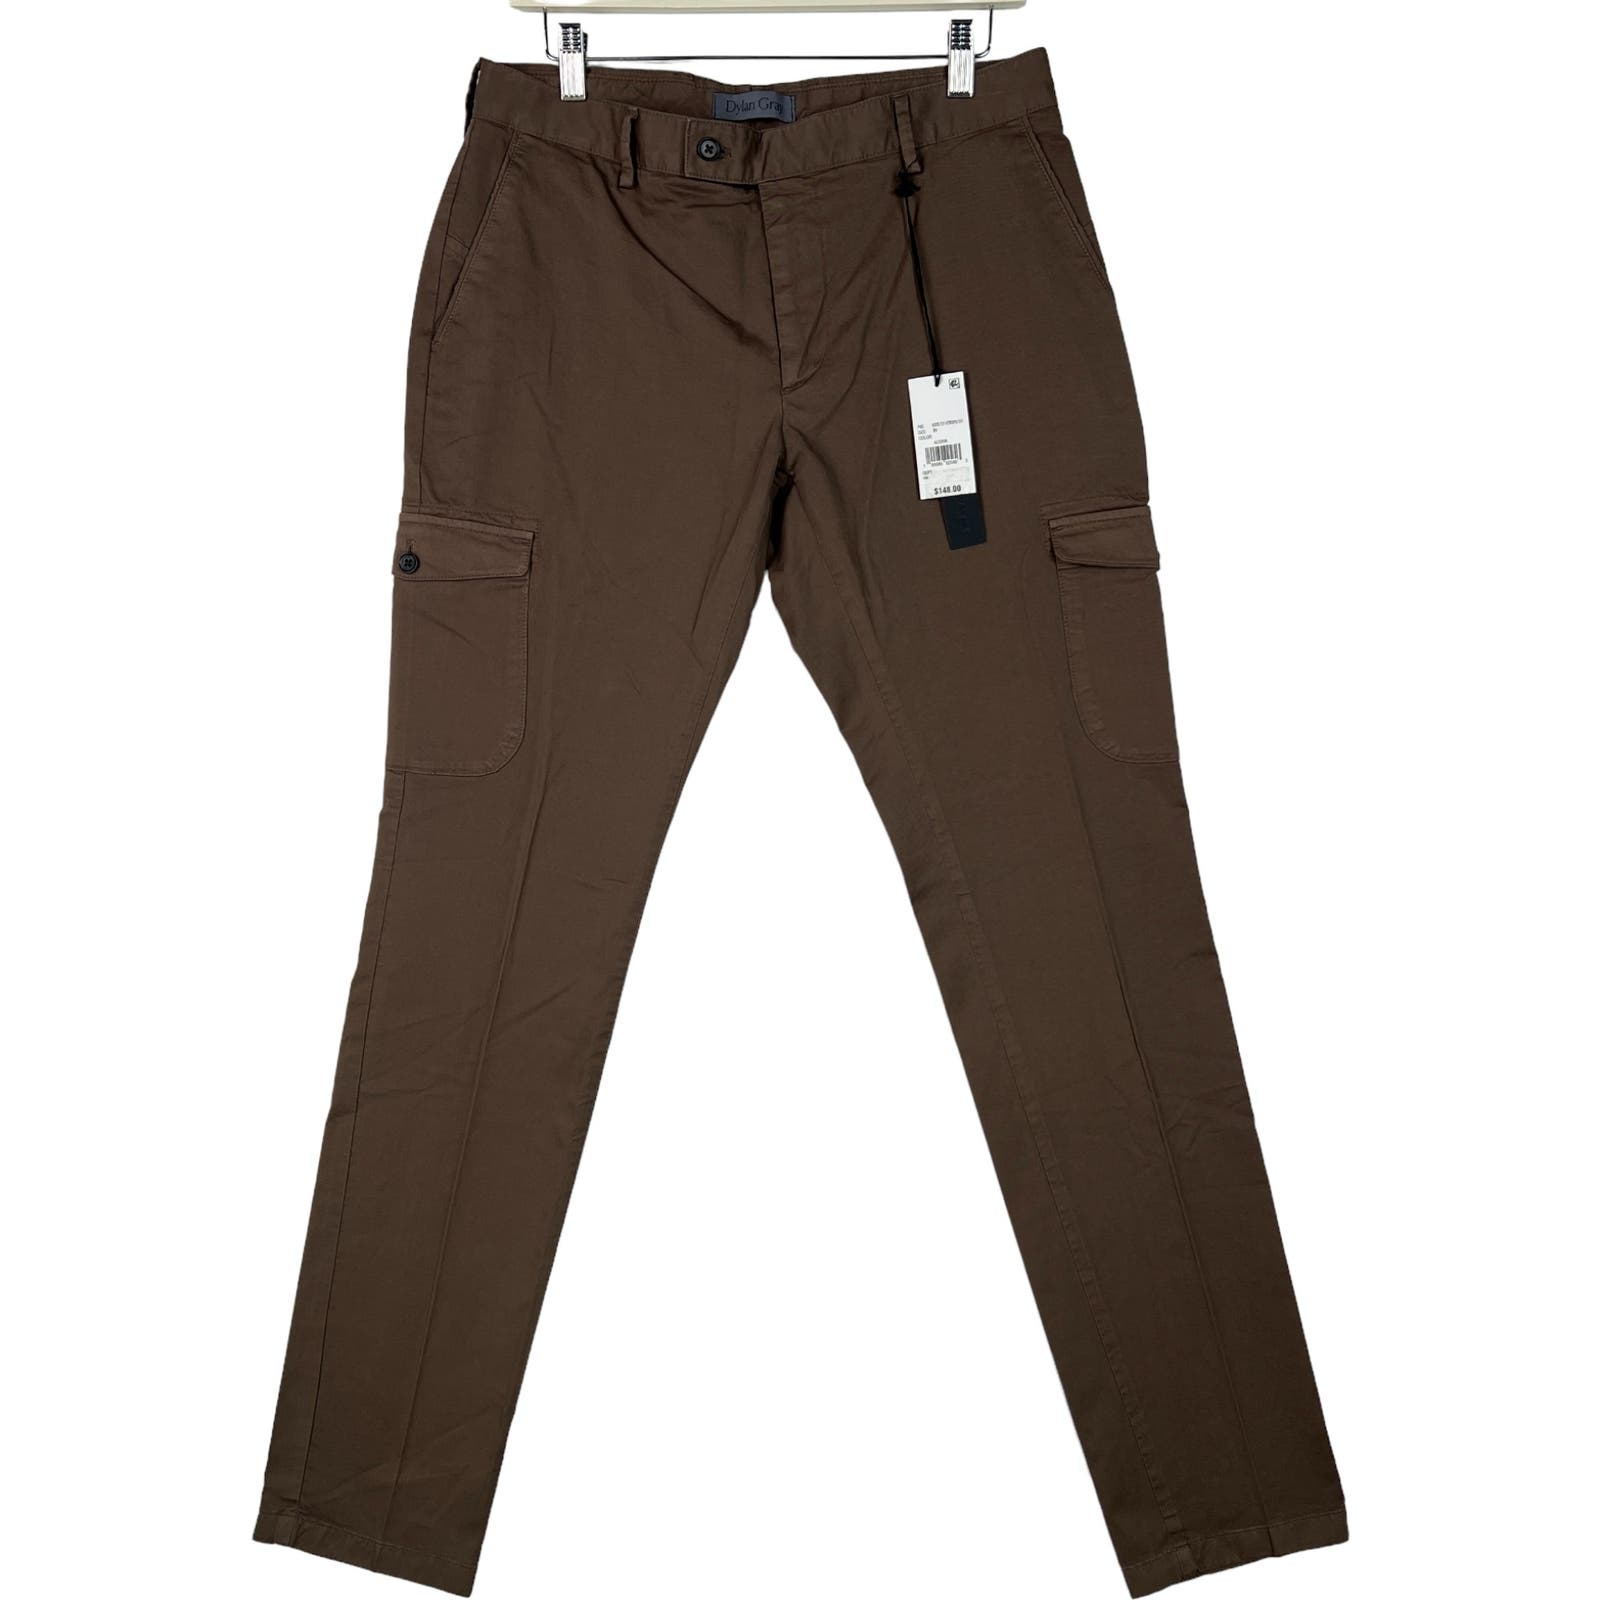 Dylan Gray Men Brown Jeans US 31 Classic Fit Cargo Pants